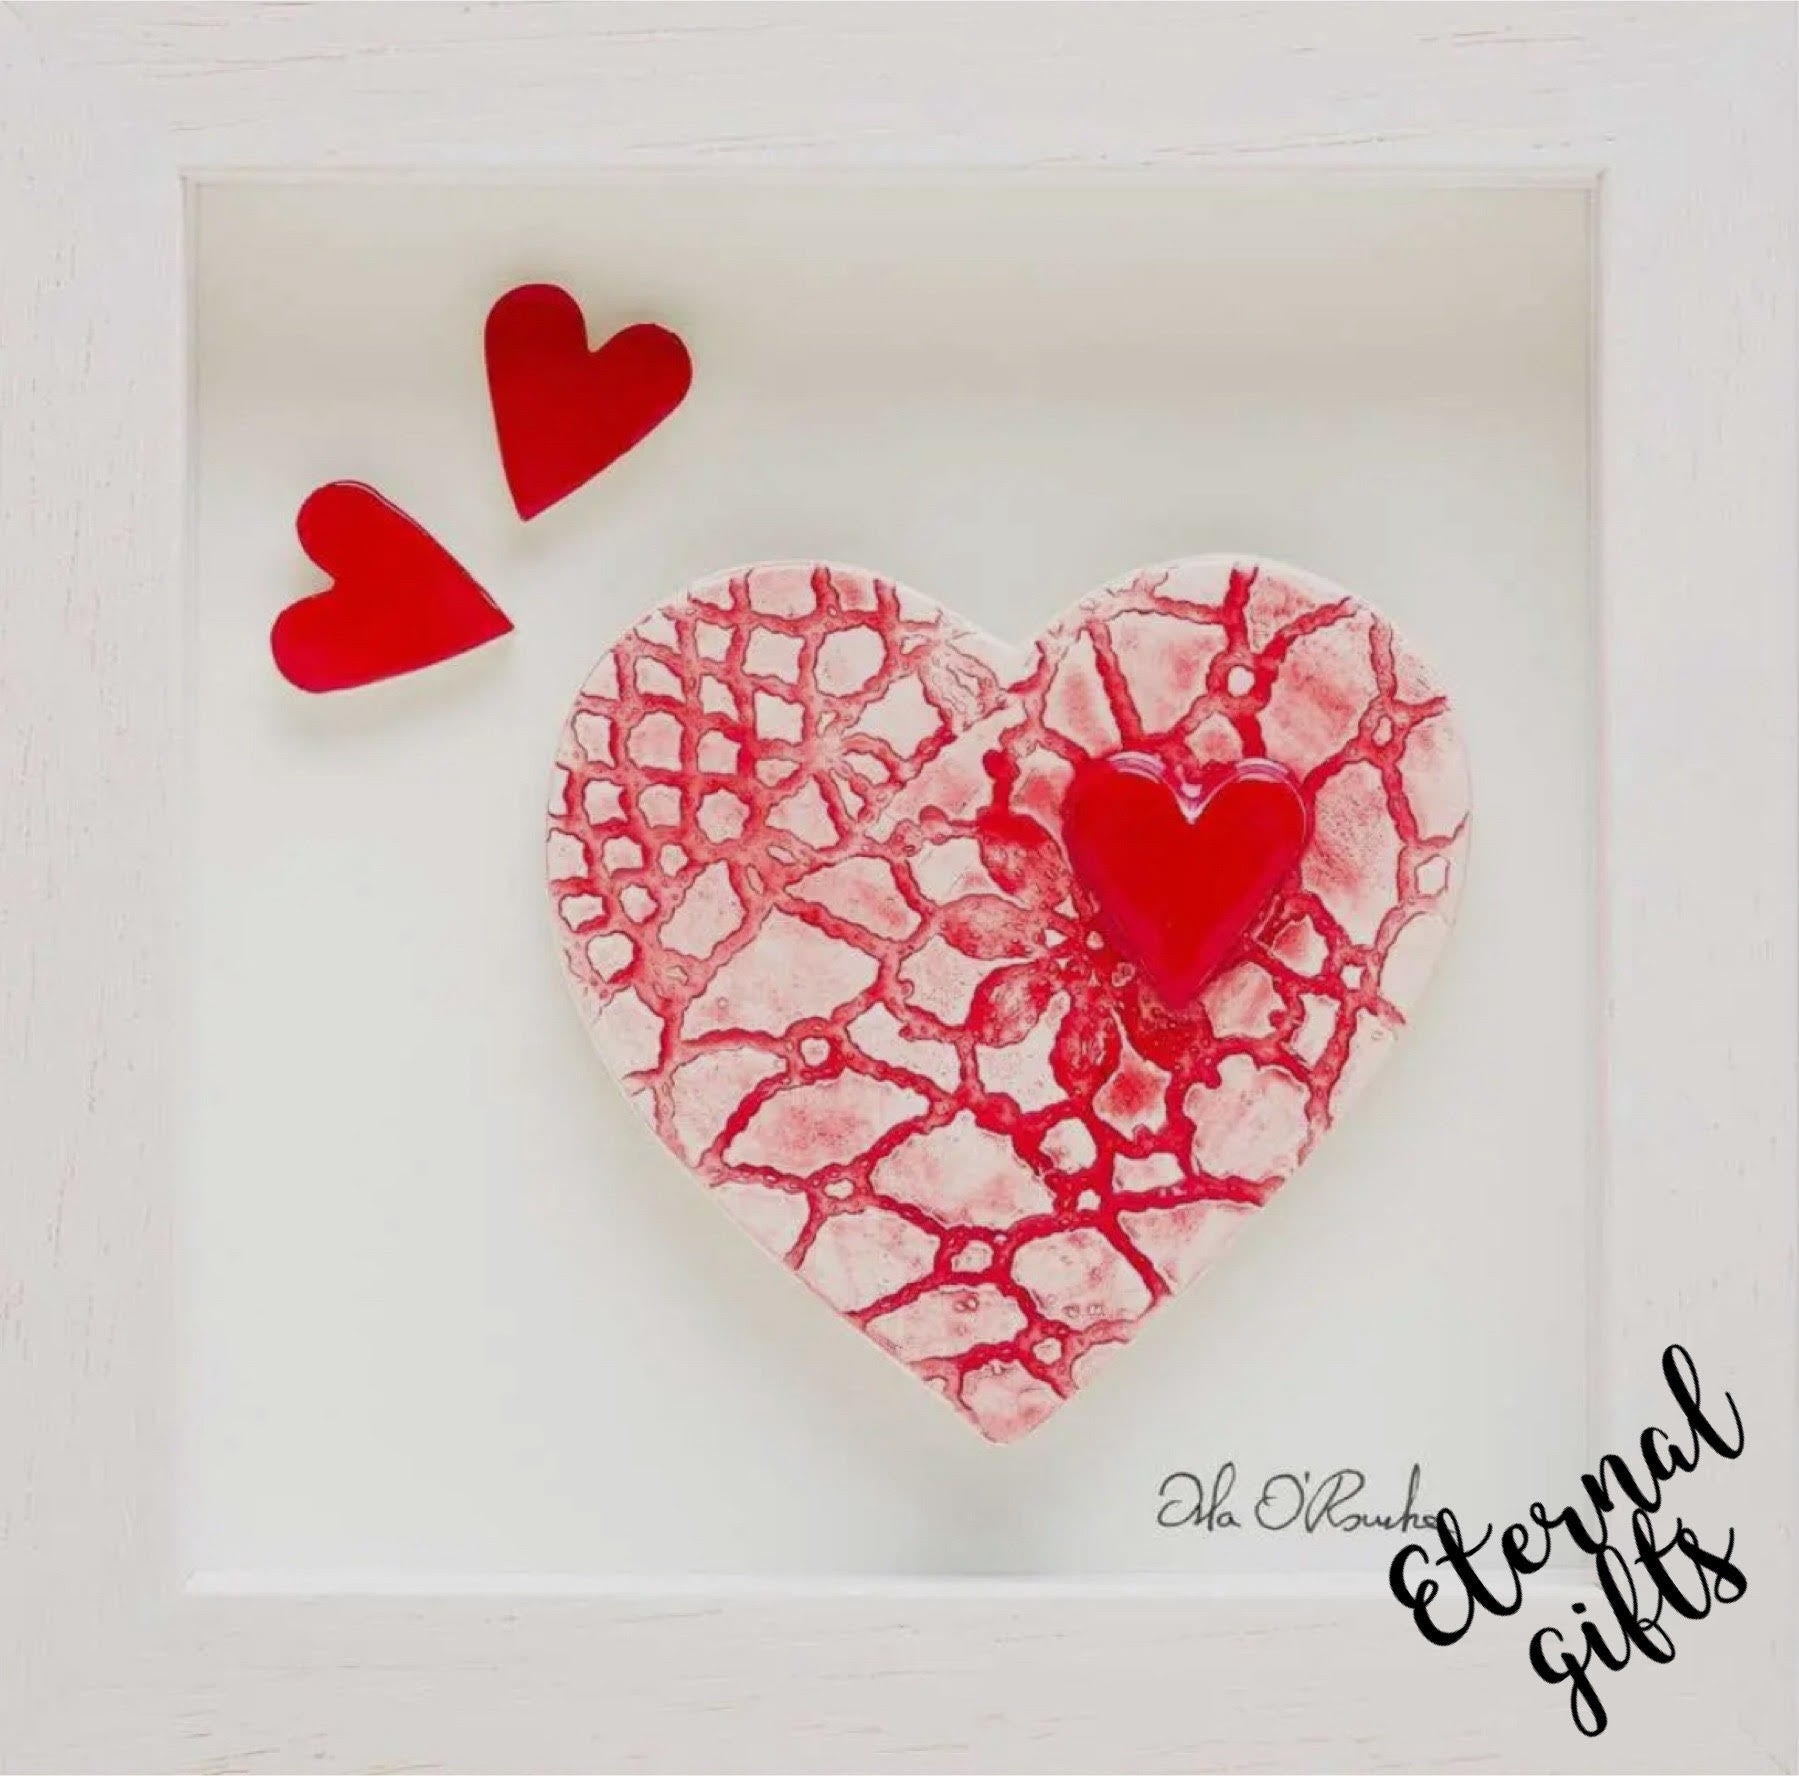 Beating Heart Ceramic Piece by Stable Door Pottery